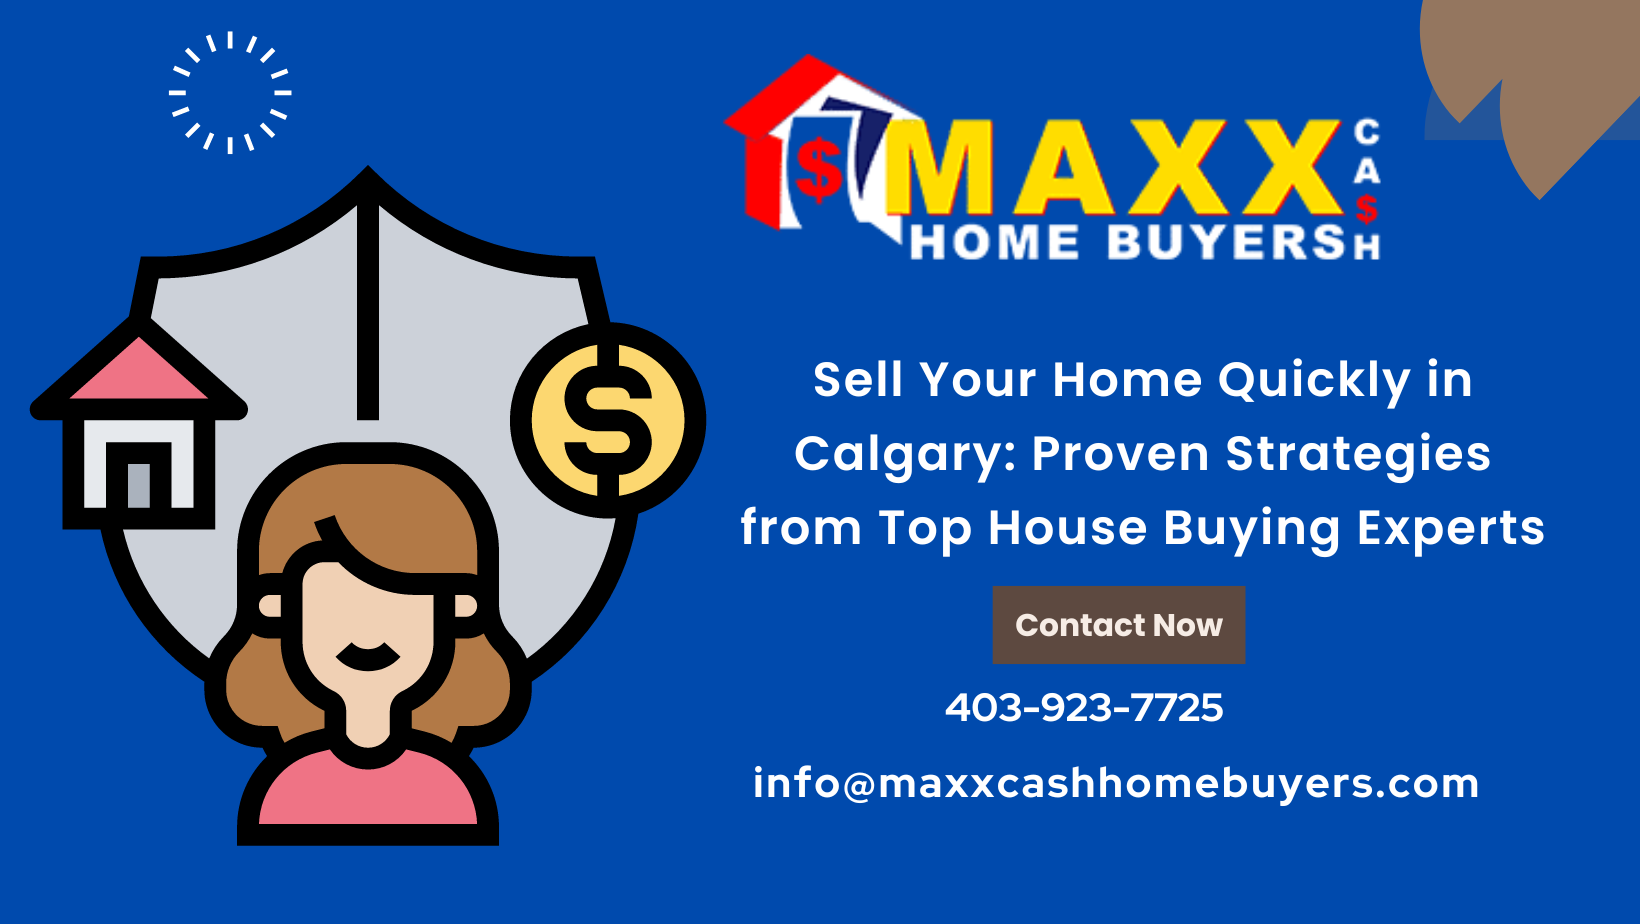 Sell Your Home Quickly in Calgary Proven Strategies from Top House Buying Experts